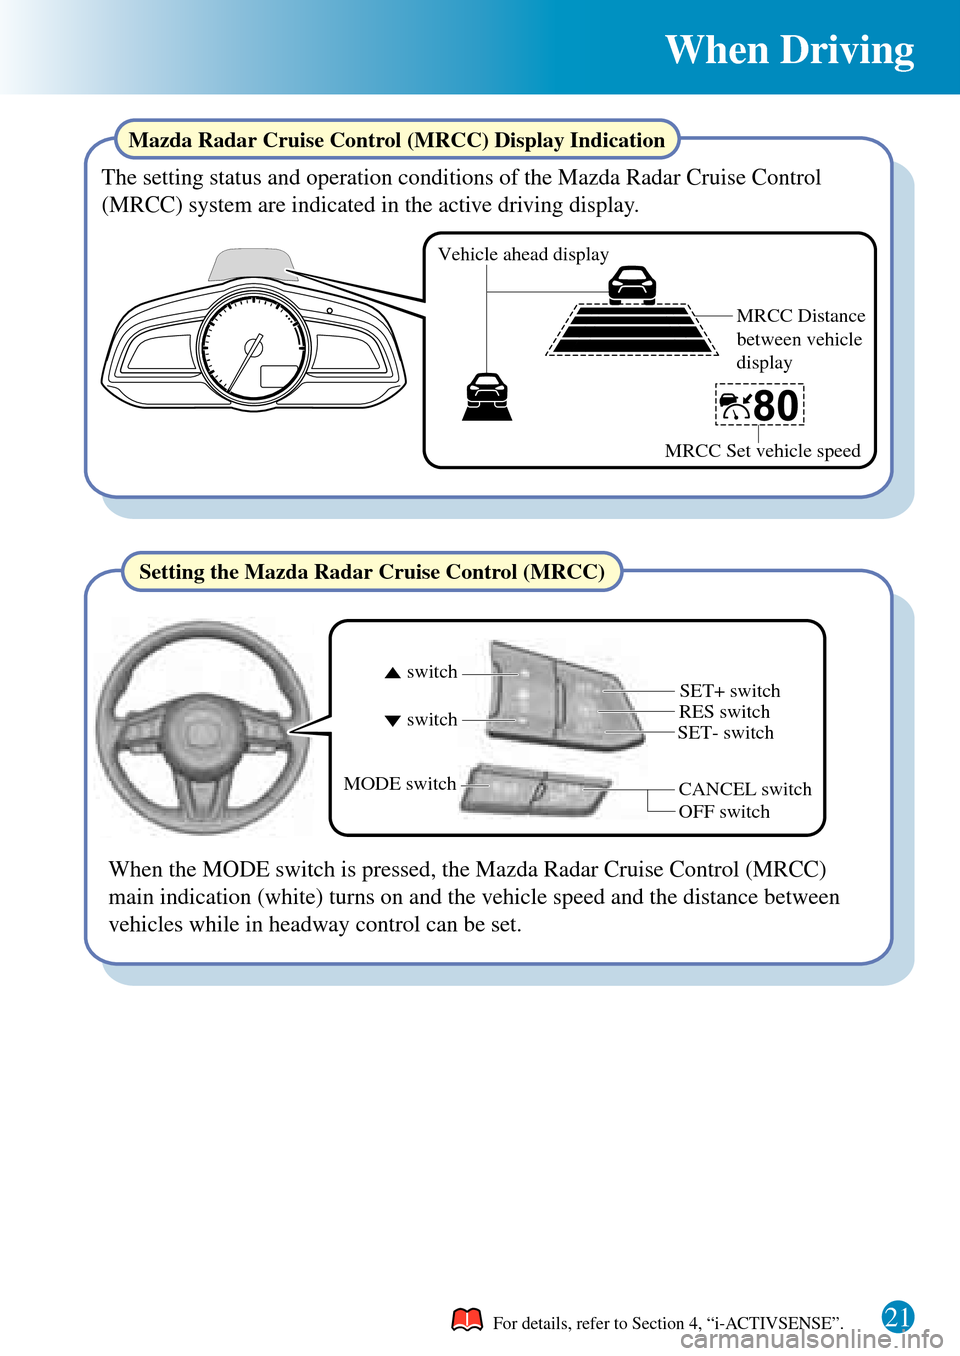 MAZDA MODEL 3 HATCHBACK 2016  Quick Guide (in English) 21
When Driving
CANCEL switchRES switch
OFF switch switch switchMODE switch
SET+ switch
SET- switch
Vehicle ahead display
MRCC Distance 
between vehicle 
display
MRCC Set vehicle speed
Setting the Maz